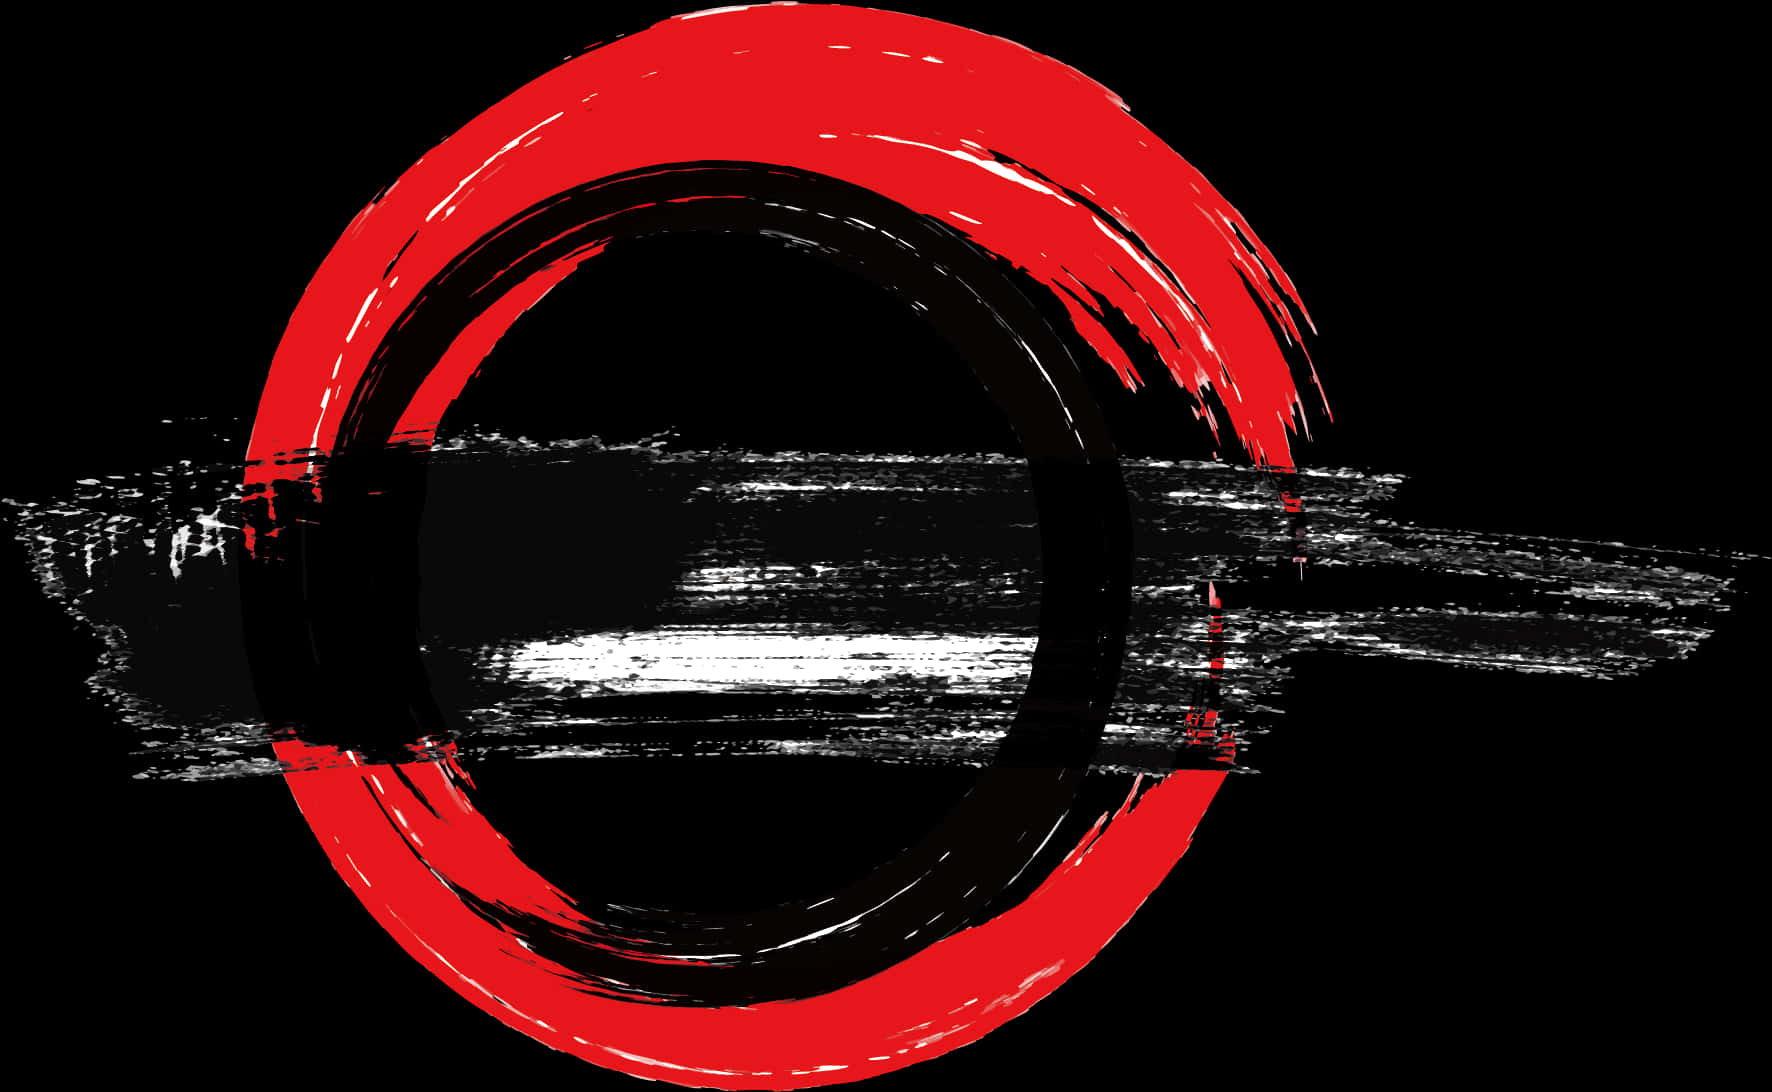 A Red Circle With Black And White Paint